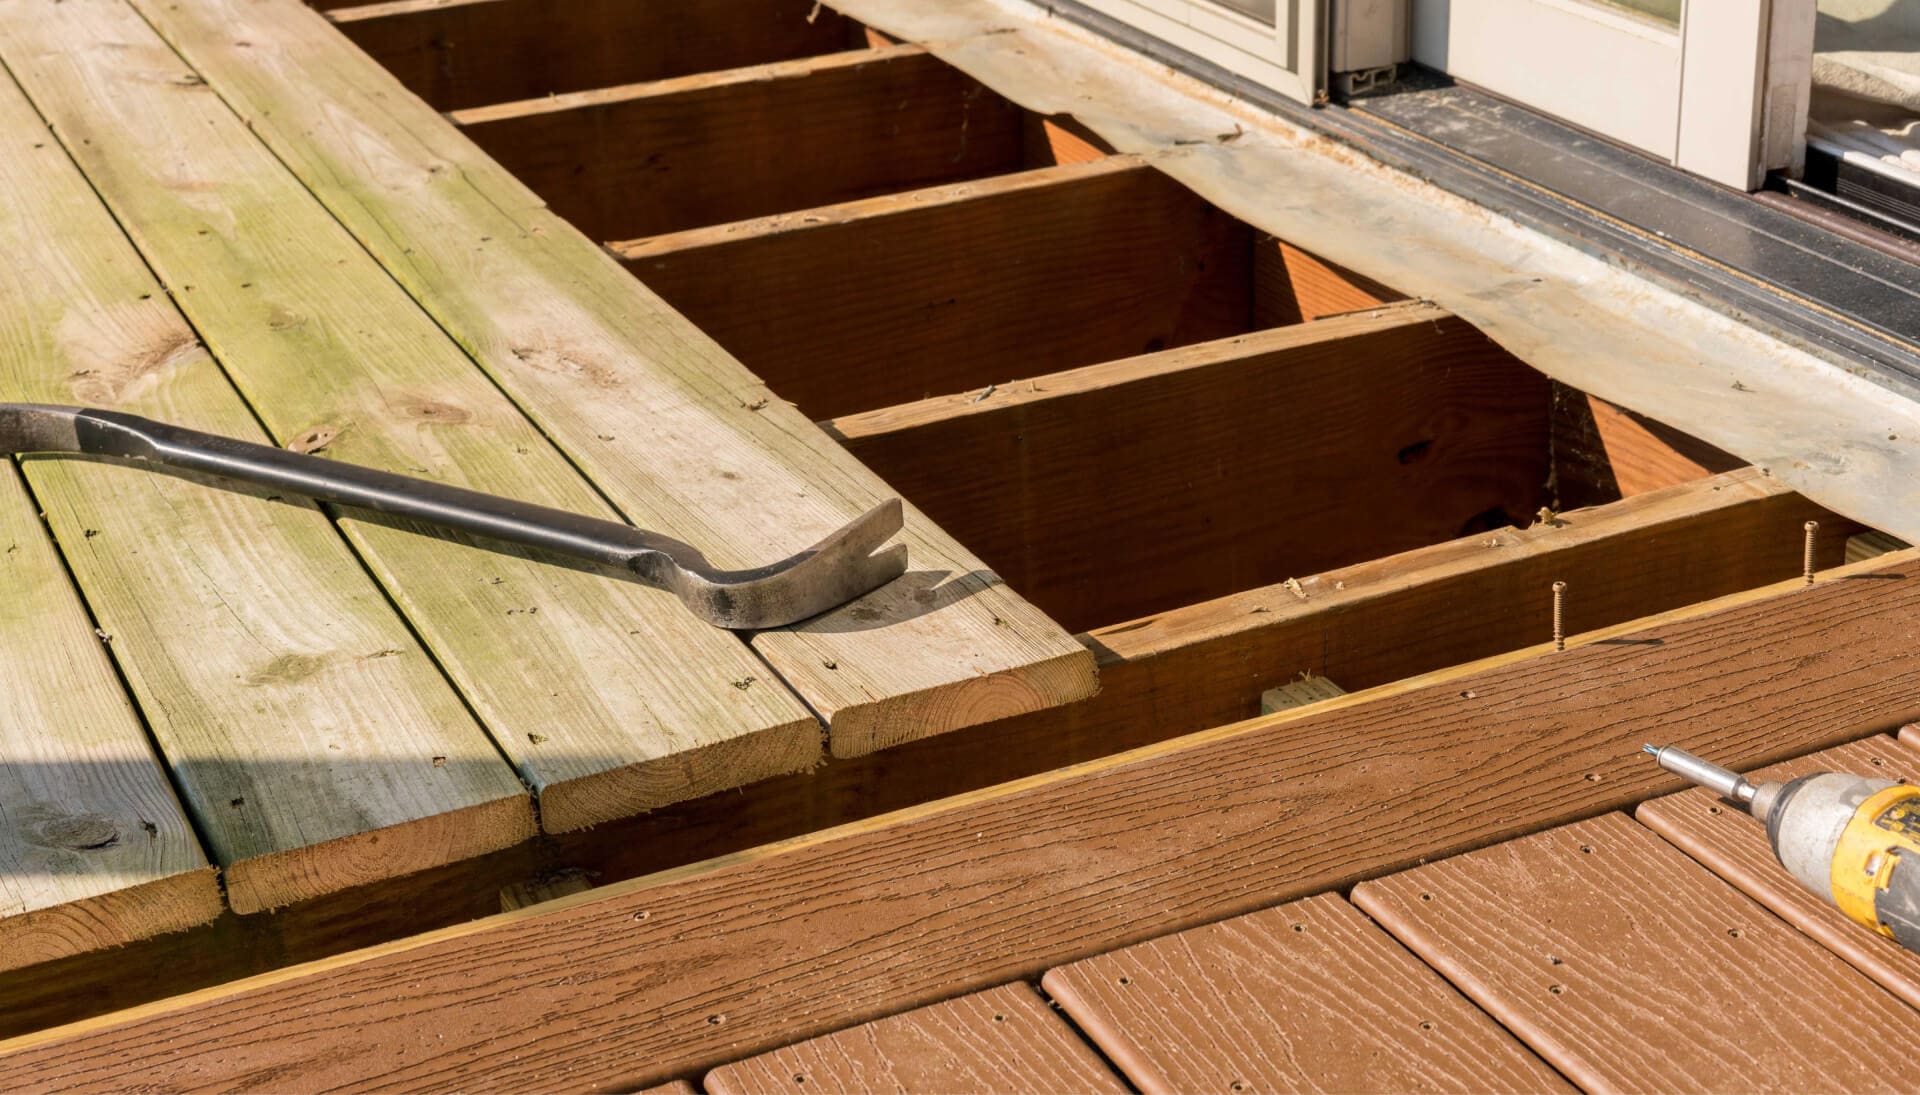 We offer the best deck repair services in Vancouver, Washington